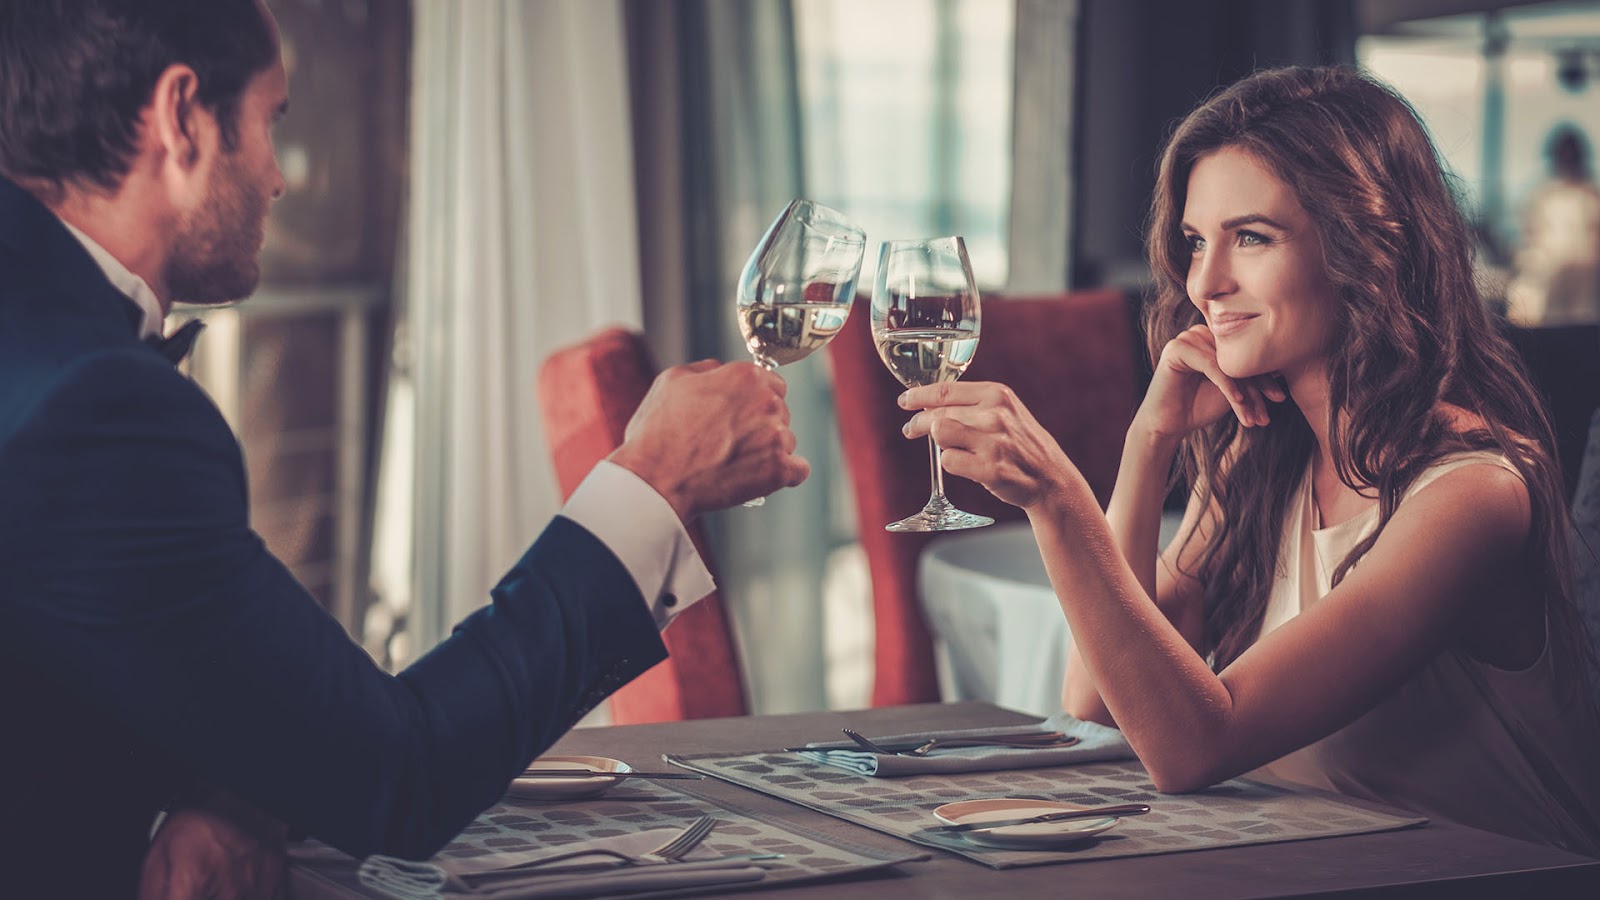 brunette man in a suit toasting his wine glass with a woman sitting across from him